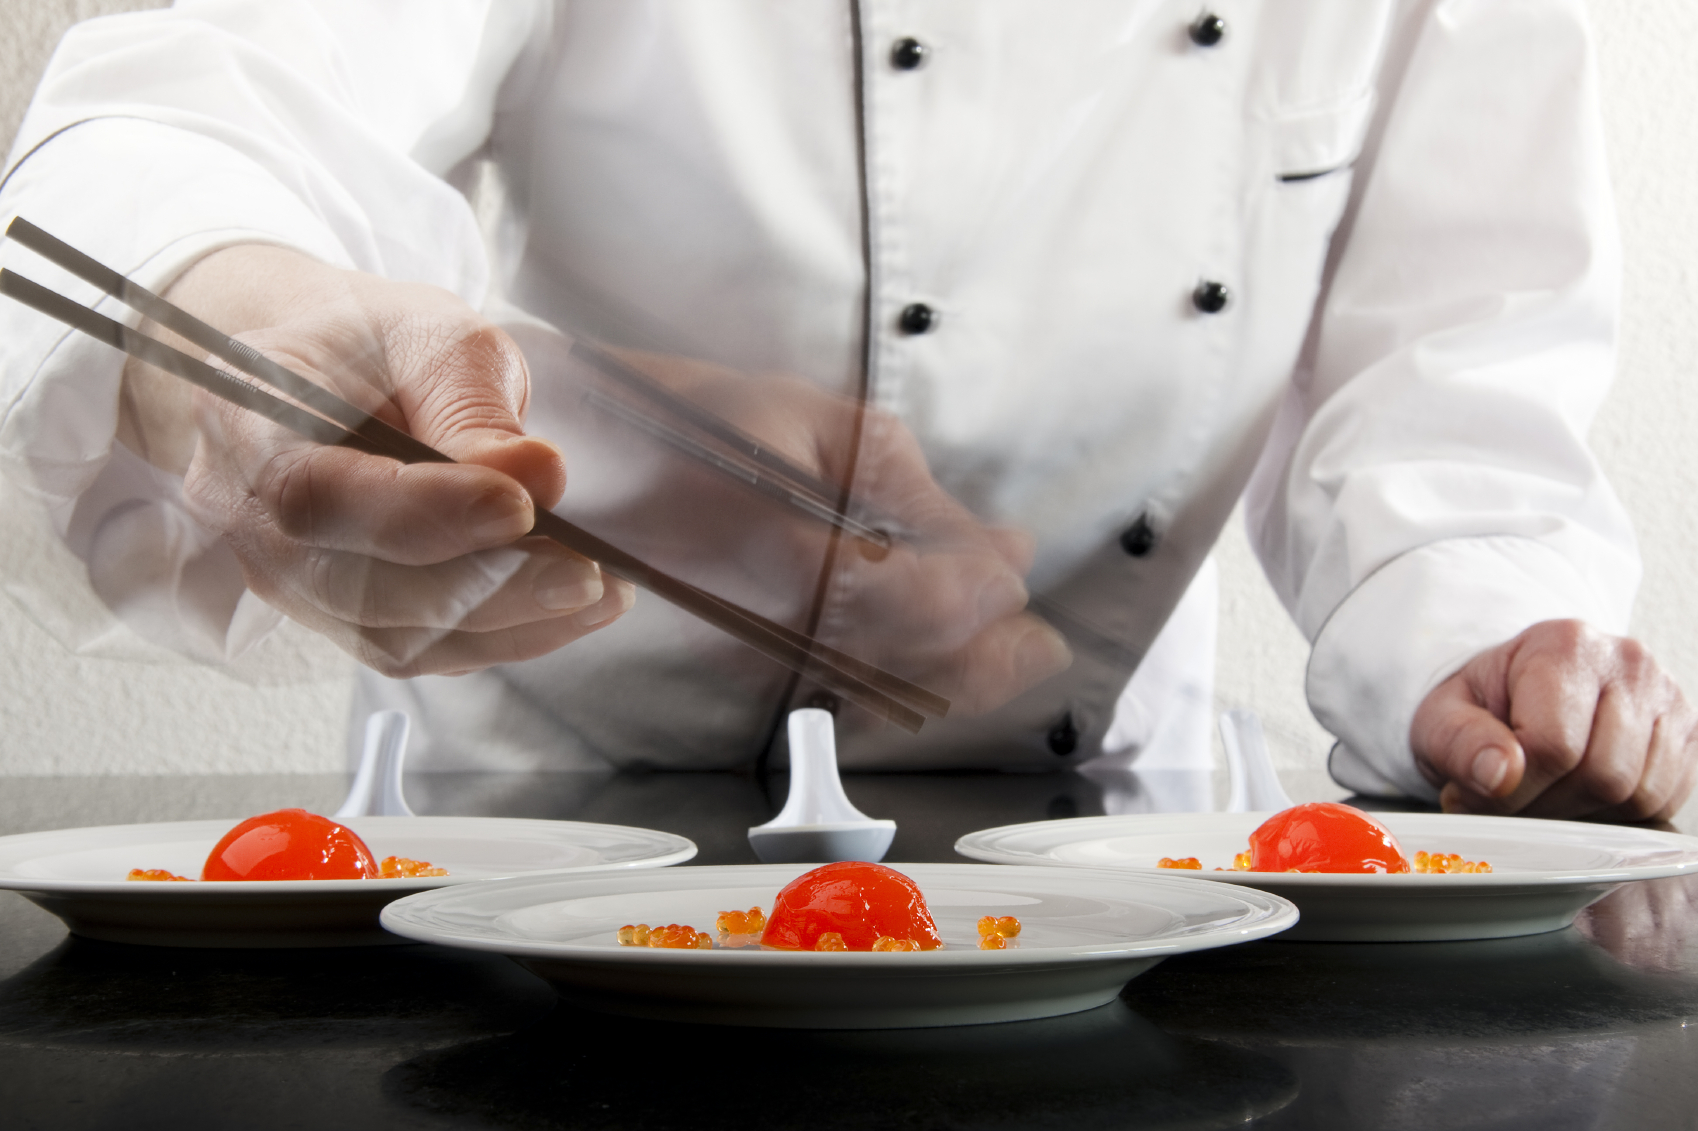 Molecular gastronomy is a scientific discipline that studies the physical and chemical processes that occur while cooking.